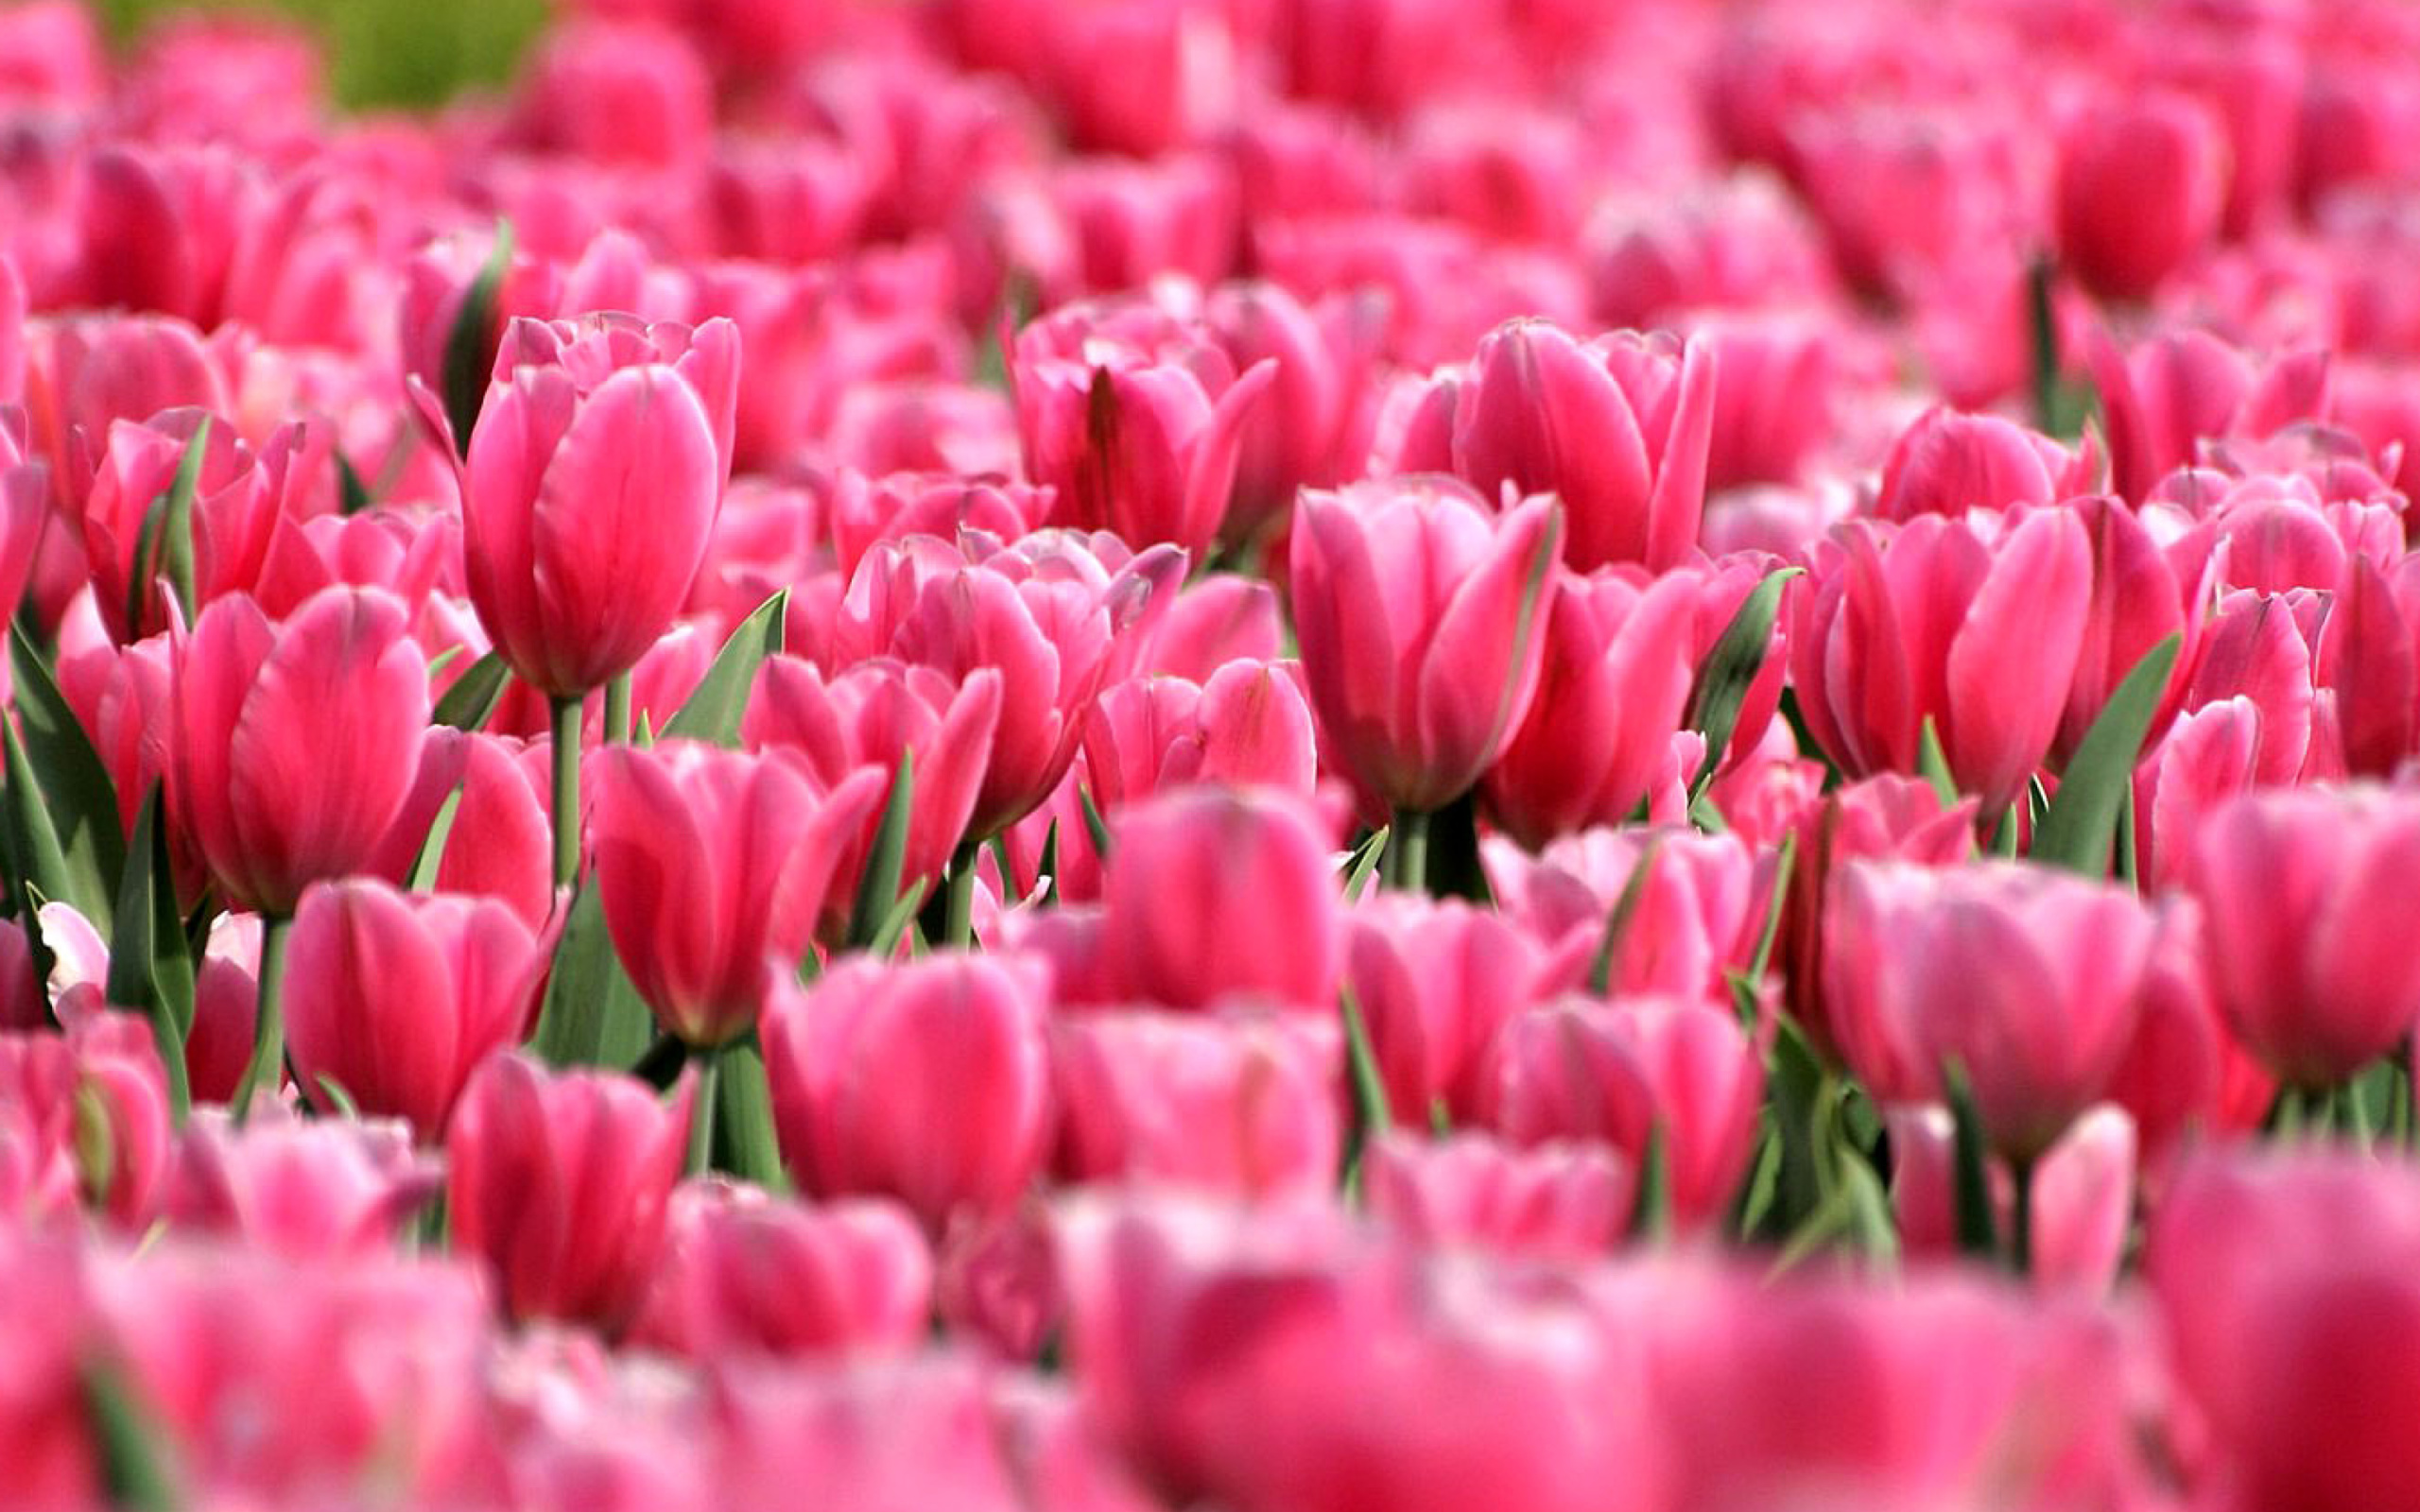 Das Pink Tulips in Holland Festival Wallpaper 2560x1600